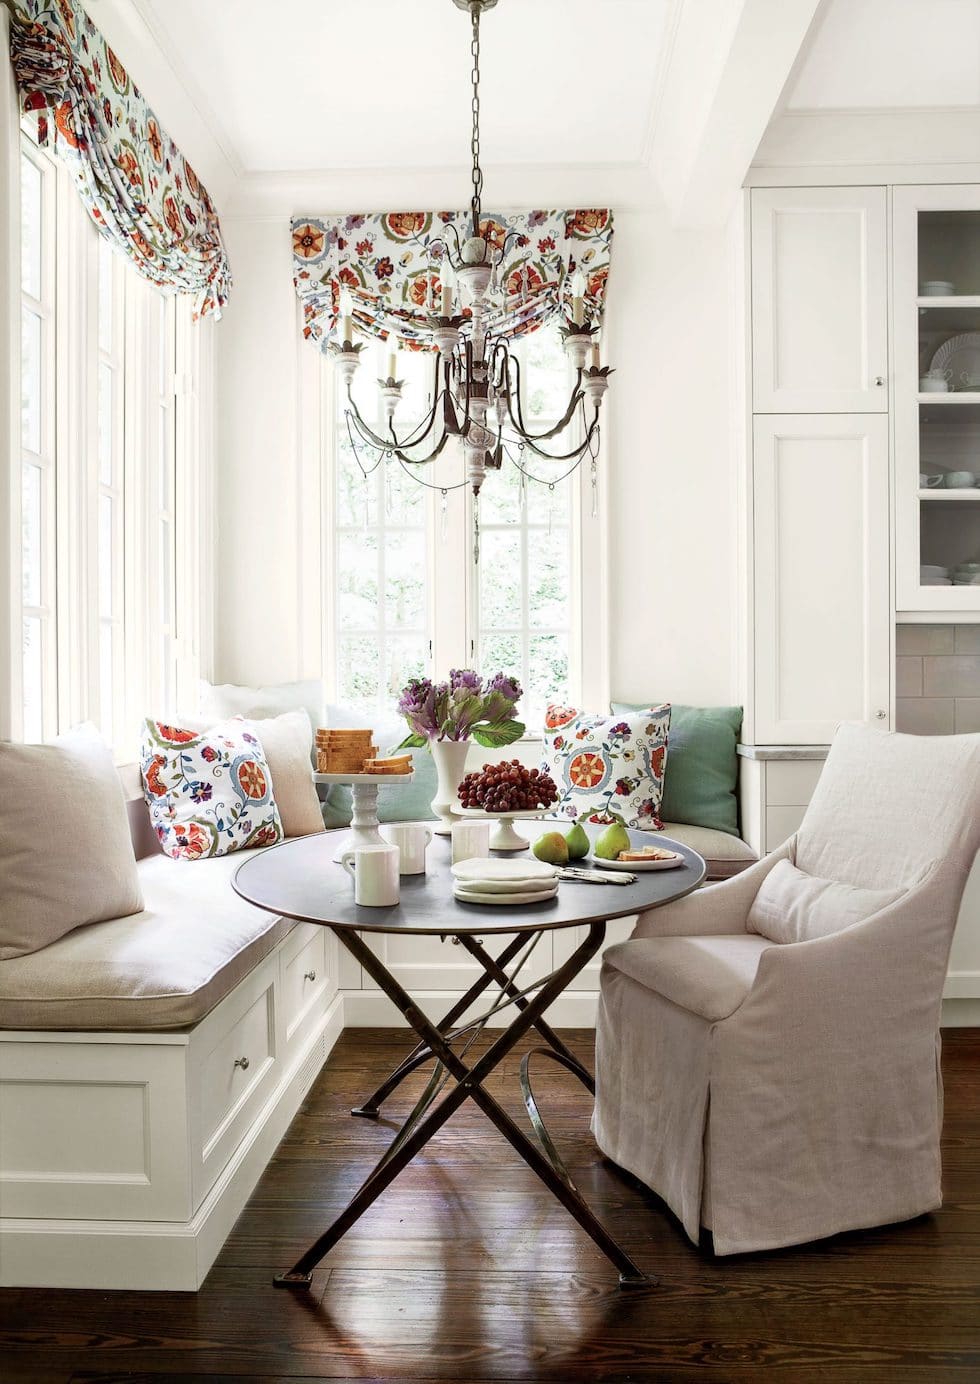 A Classic White Kitchen with Colorful Patterned Roman Shades